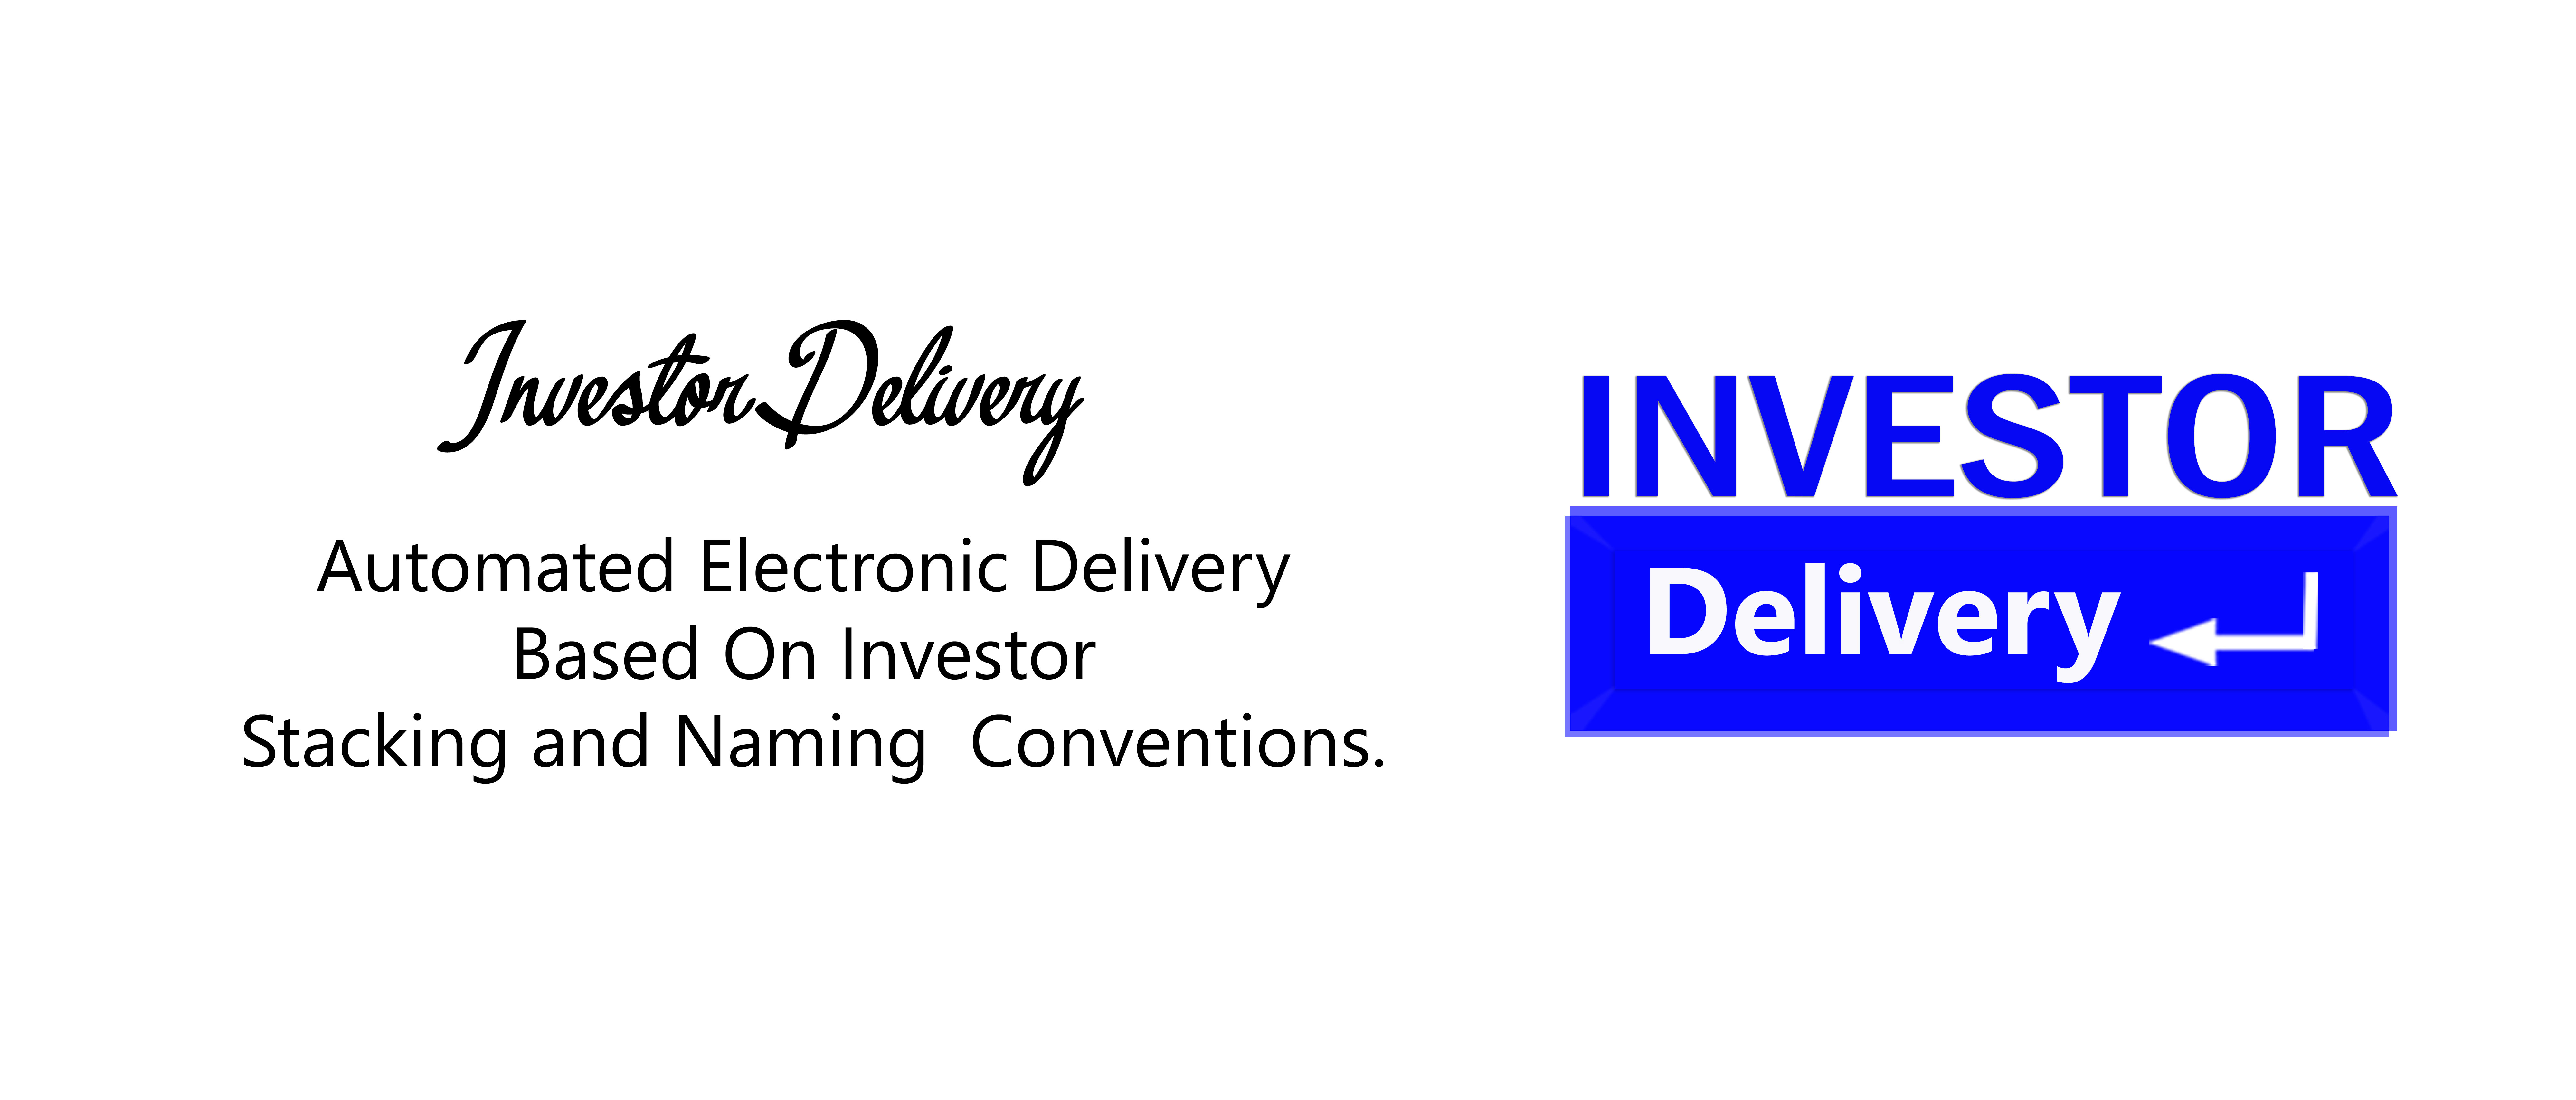 The Investor Delivery Service image